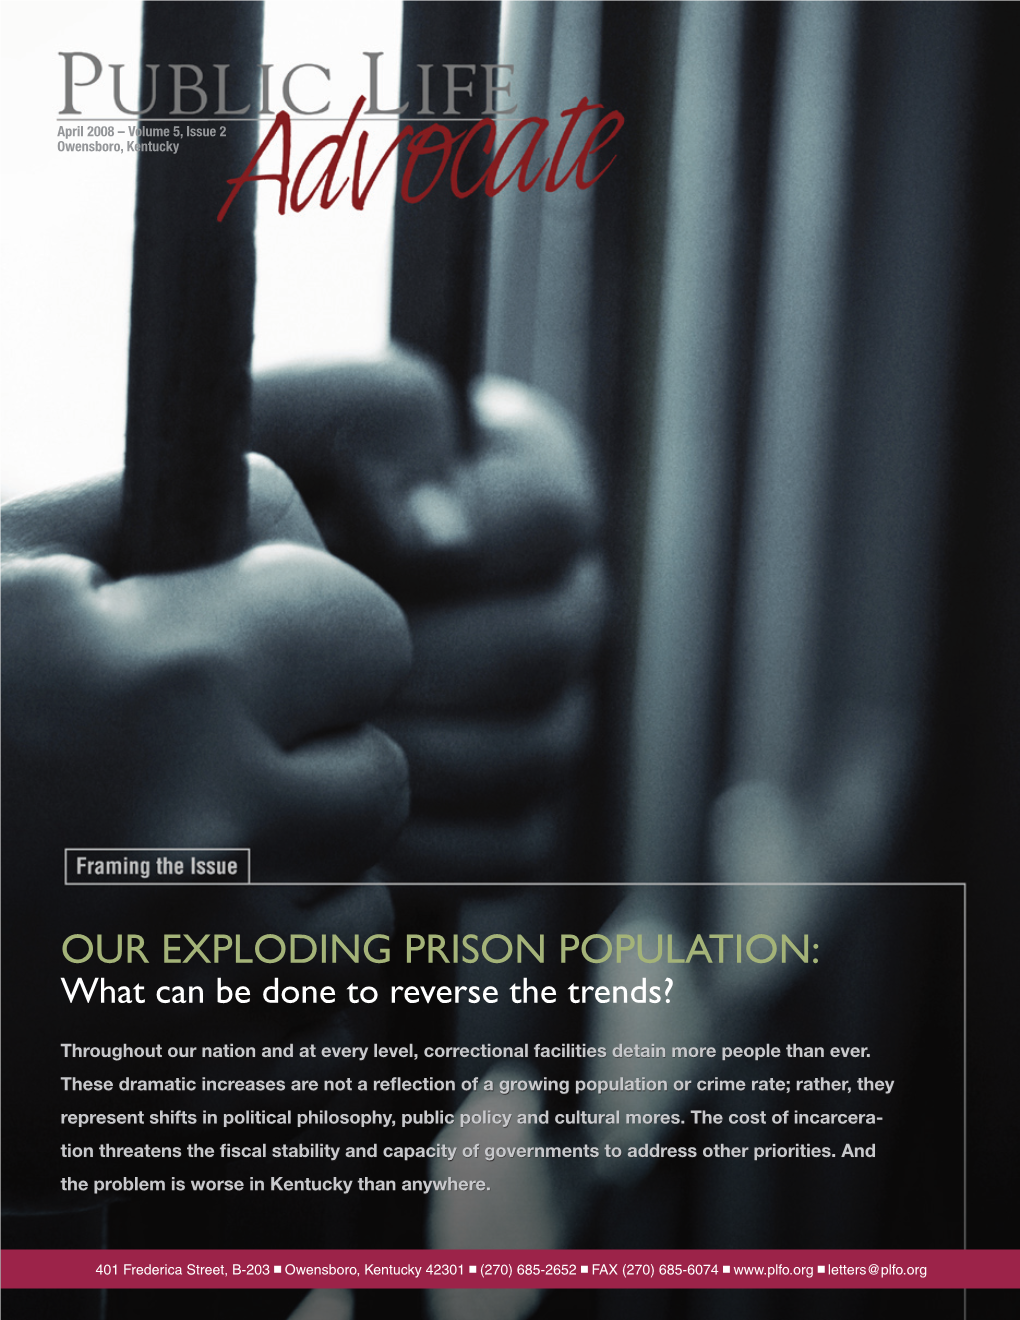 Our Exploding Prison Population: What Can Be Done to Reverse the Trends?